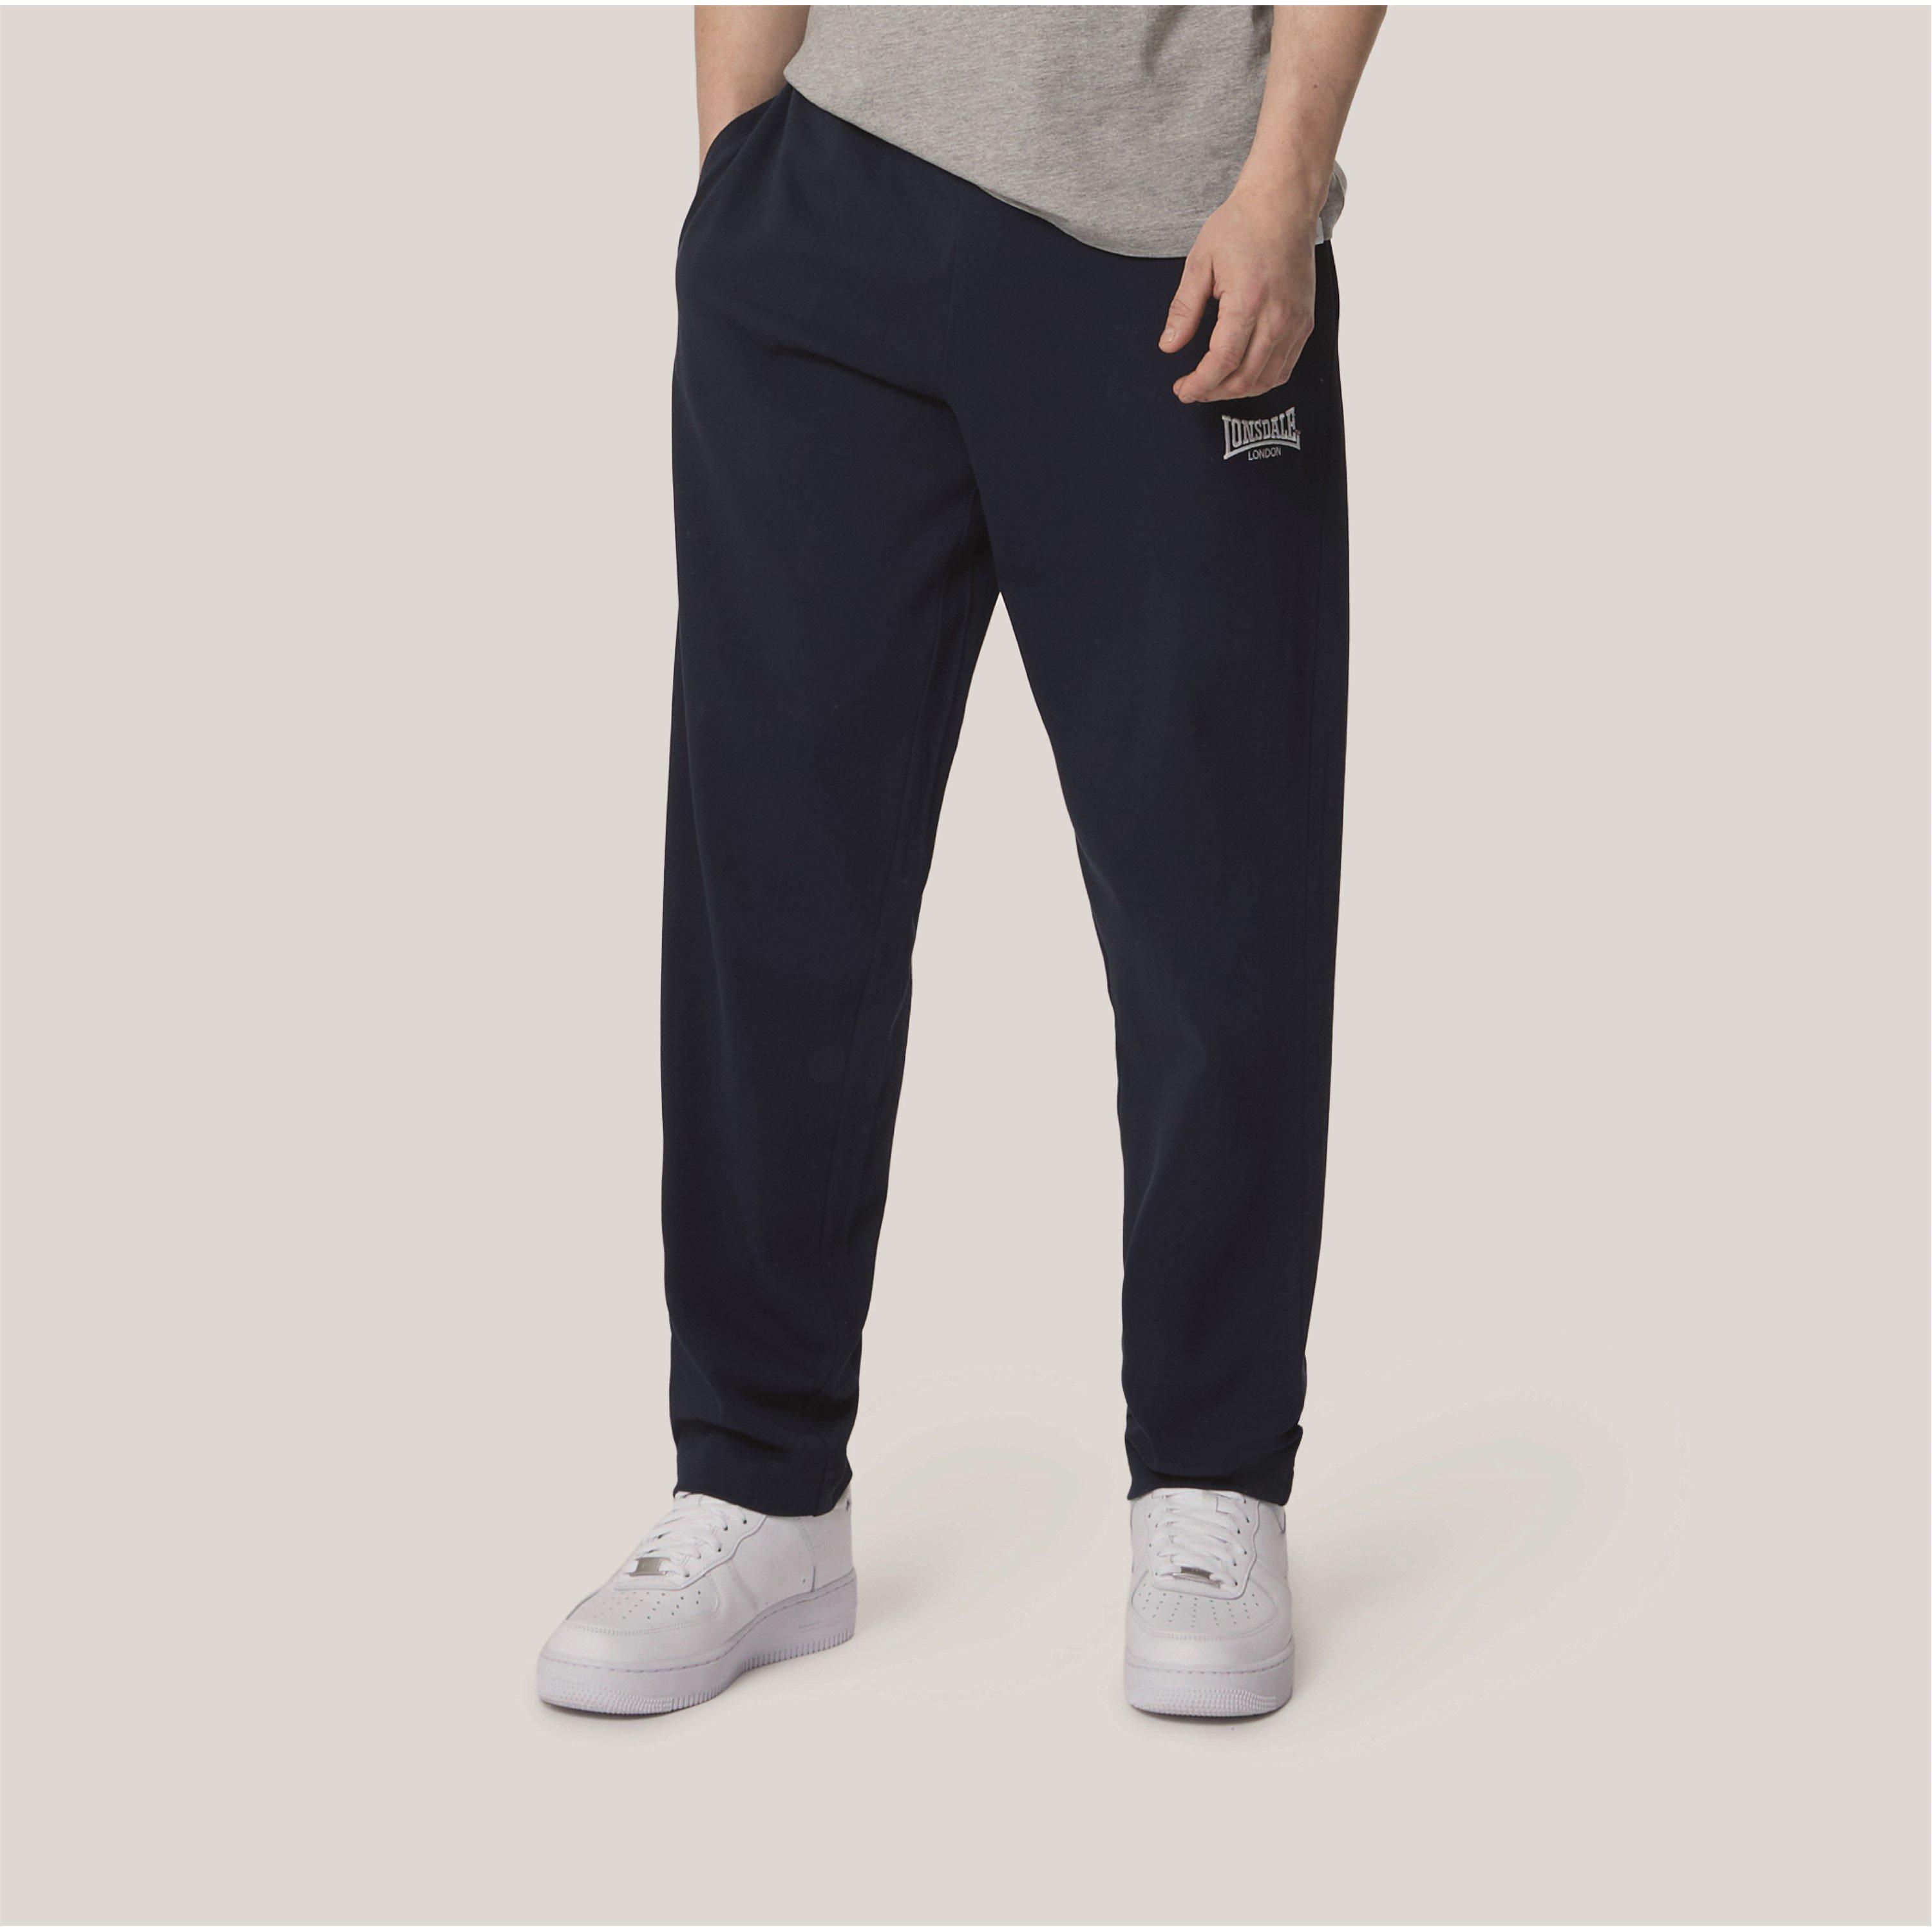 Lonsdale Mens Heavyweight Jersey Jogging Pants (Charcoal Marl